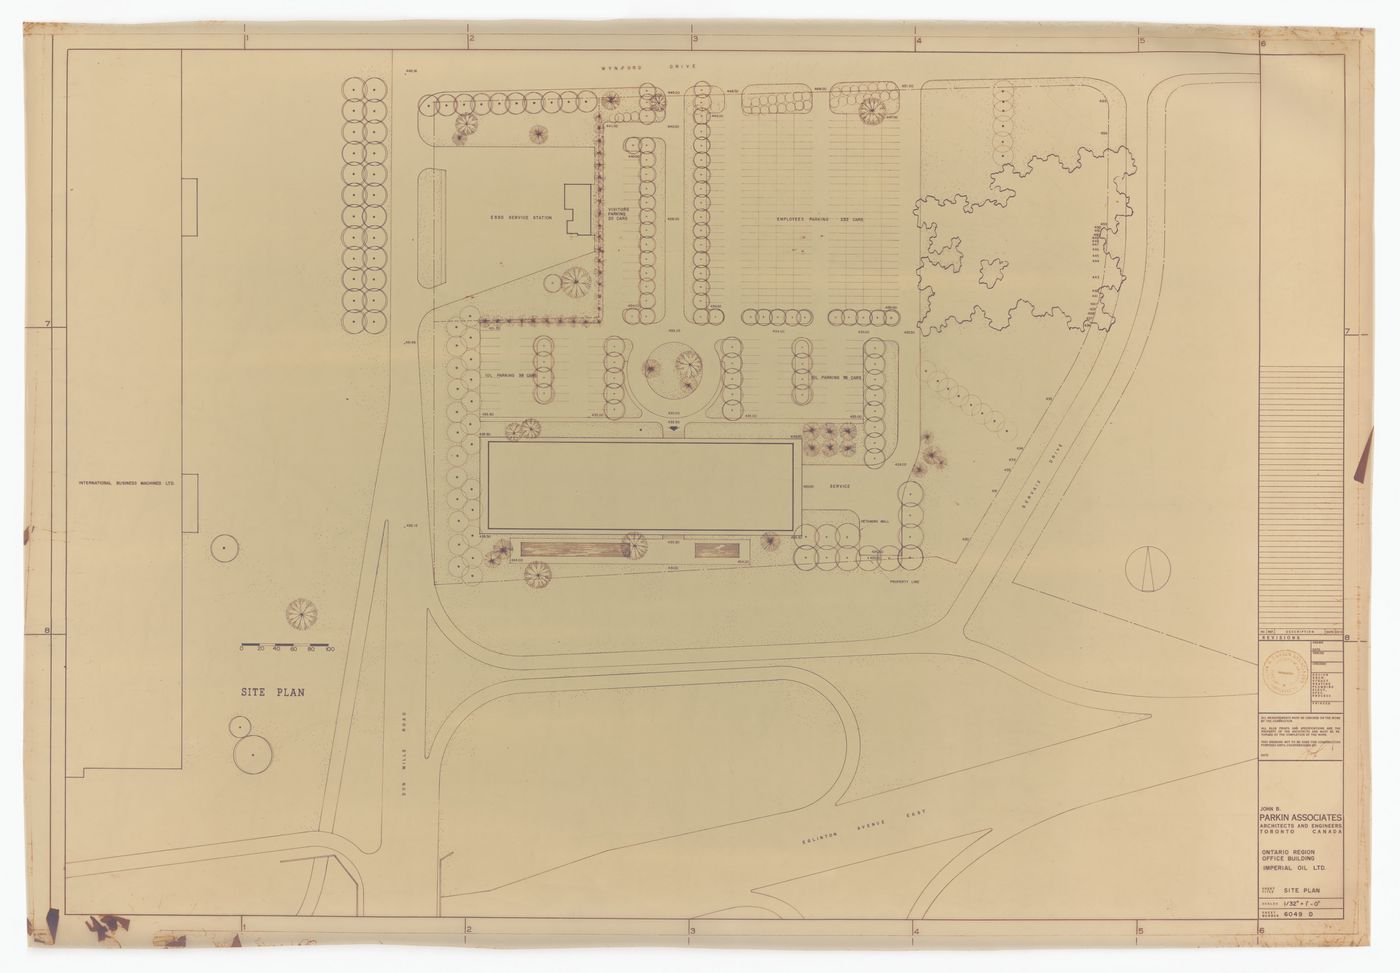 Site plan for Imperial Oil Limited, Ontario Region Office Building, North York